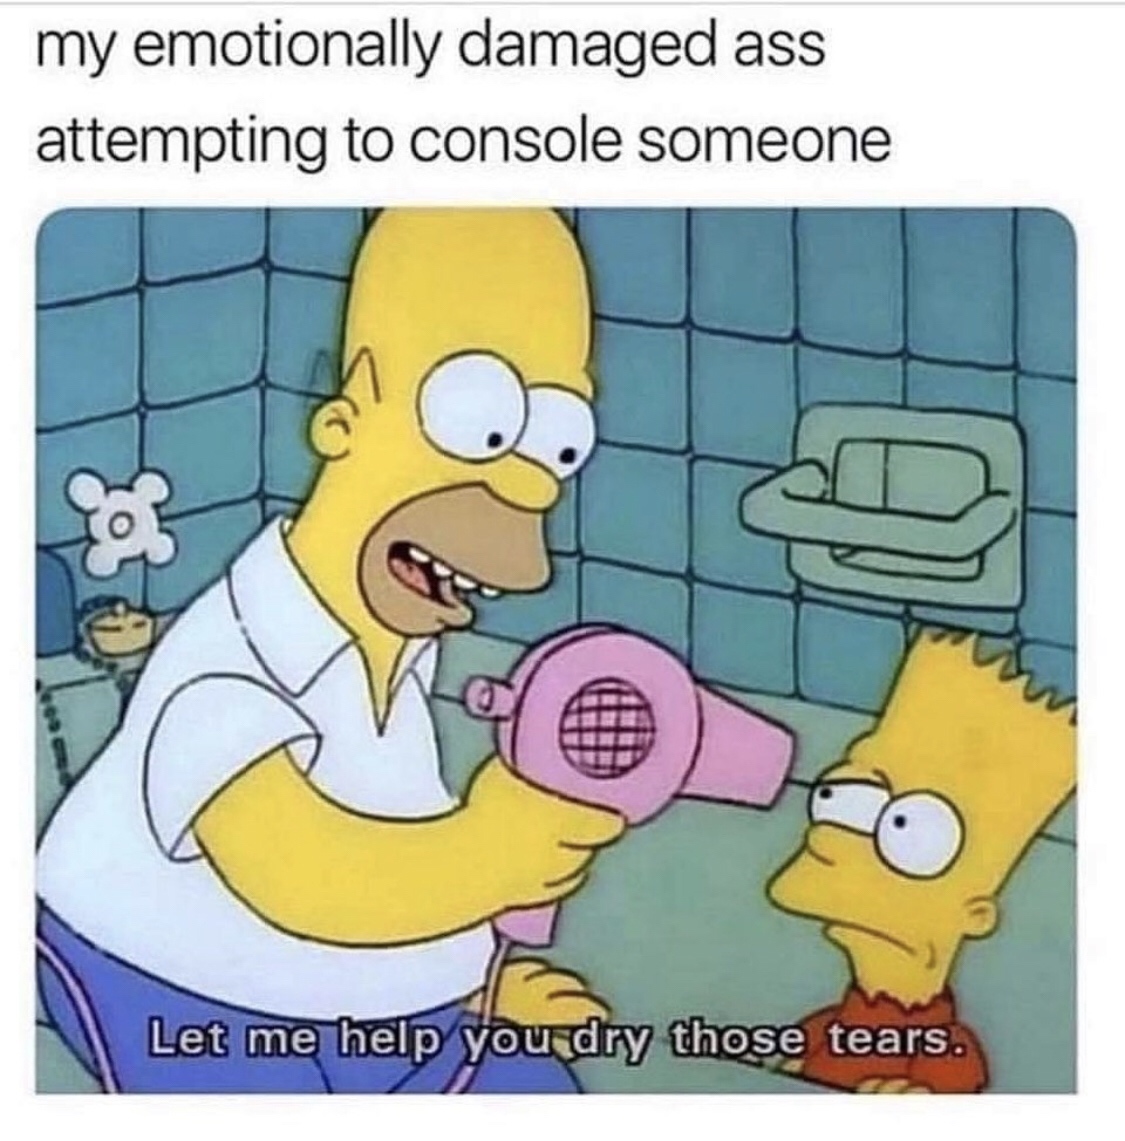 let me help you dry those tears - my emotionally damaged ass attempting to console someone Let me help you dry those tears.